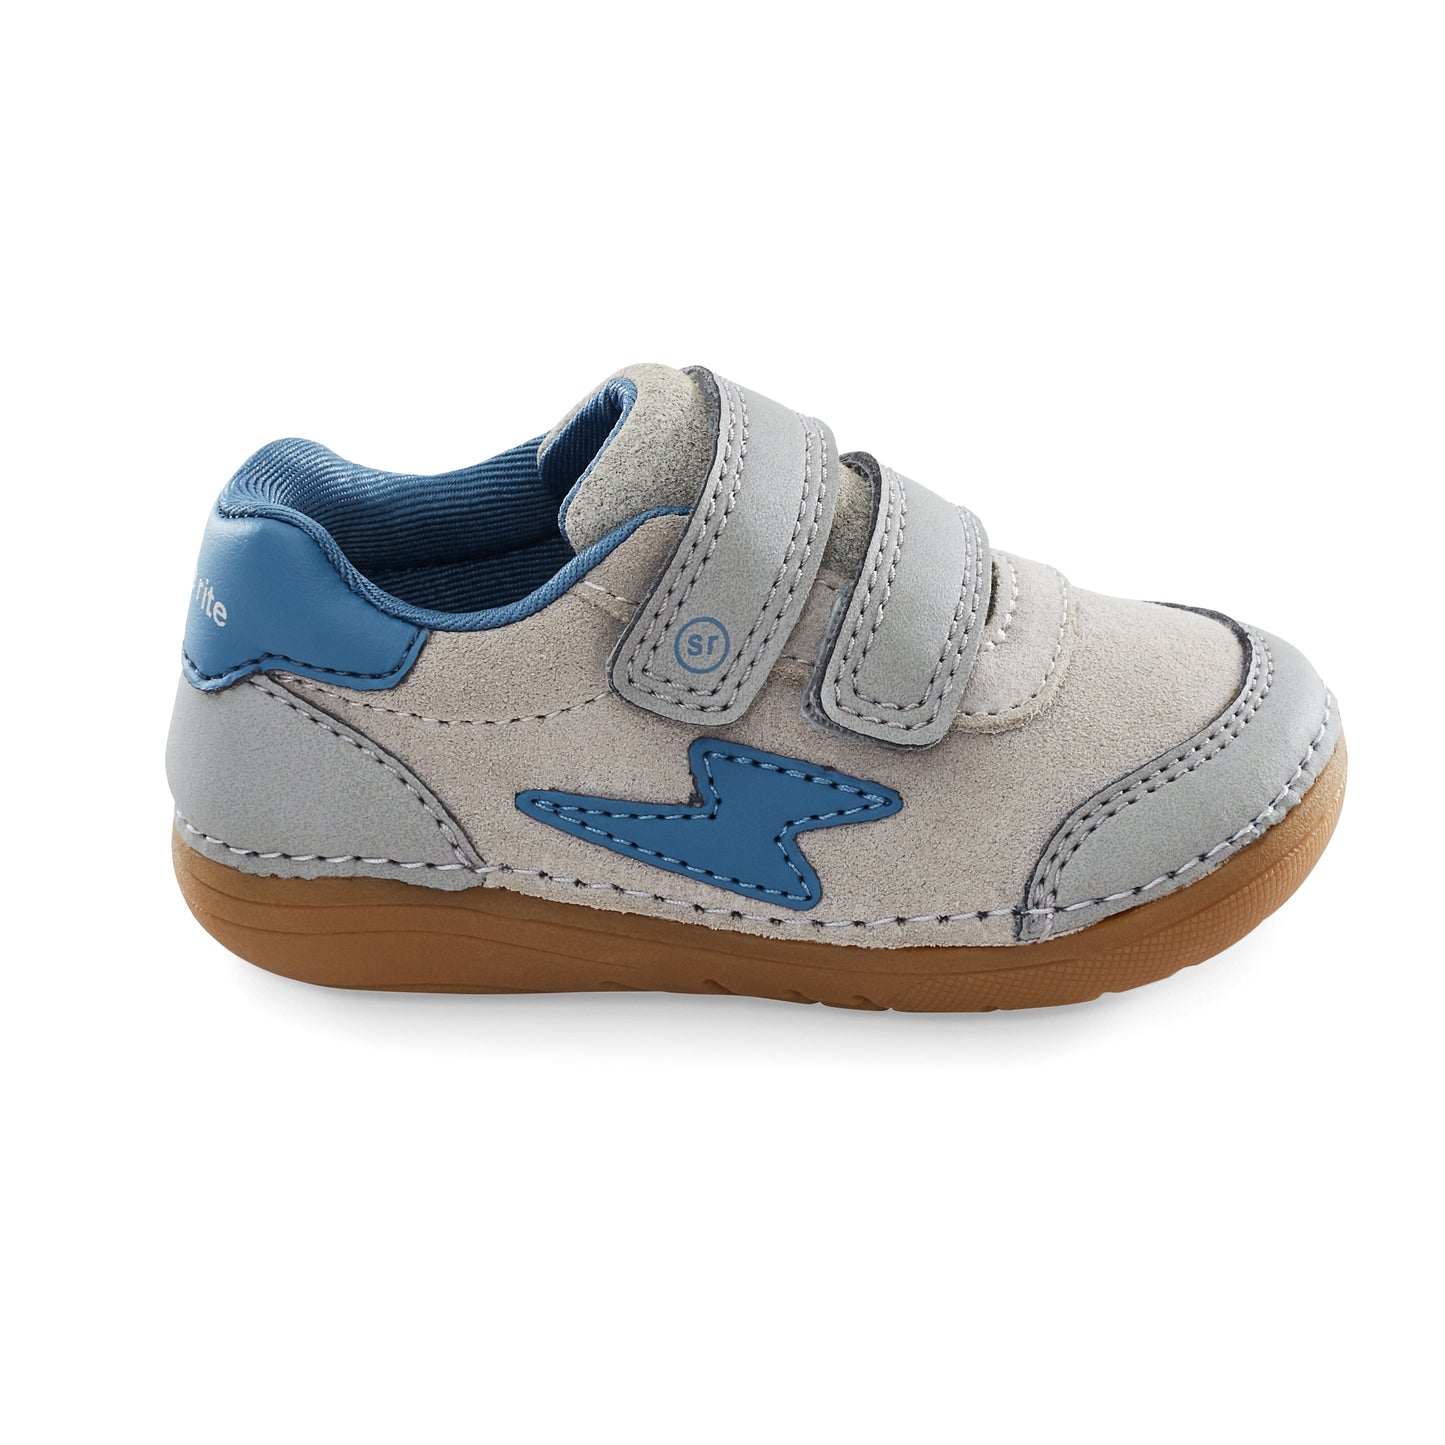 soft-motion-zips-kennedy-sneaker-littlekid-taupe-blue__Taupe/Blue_2